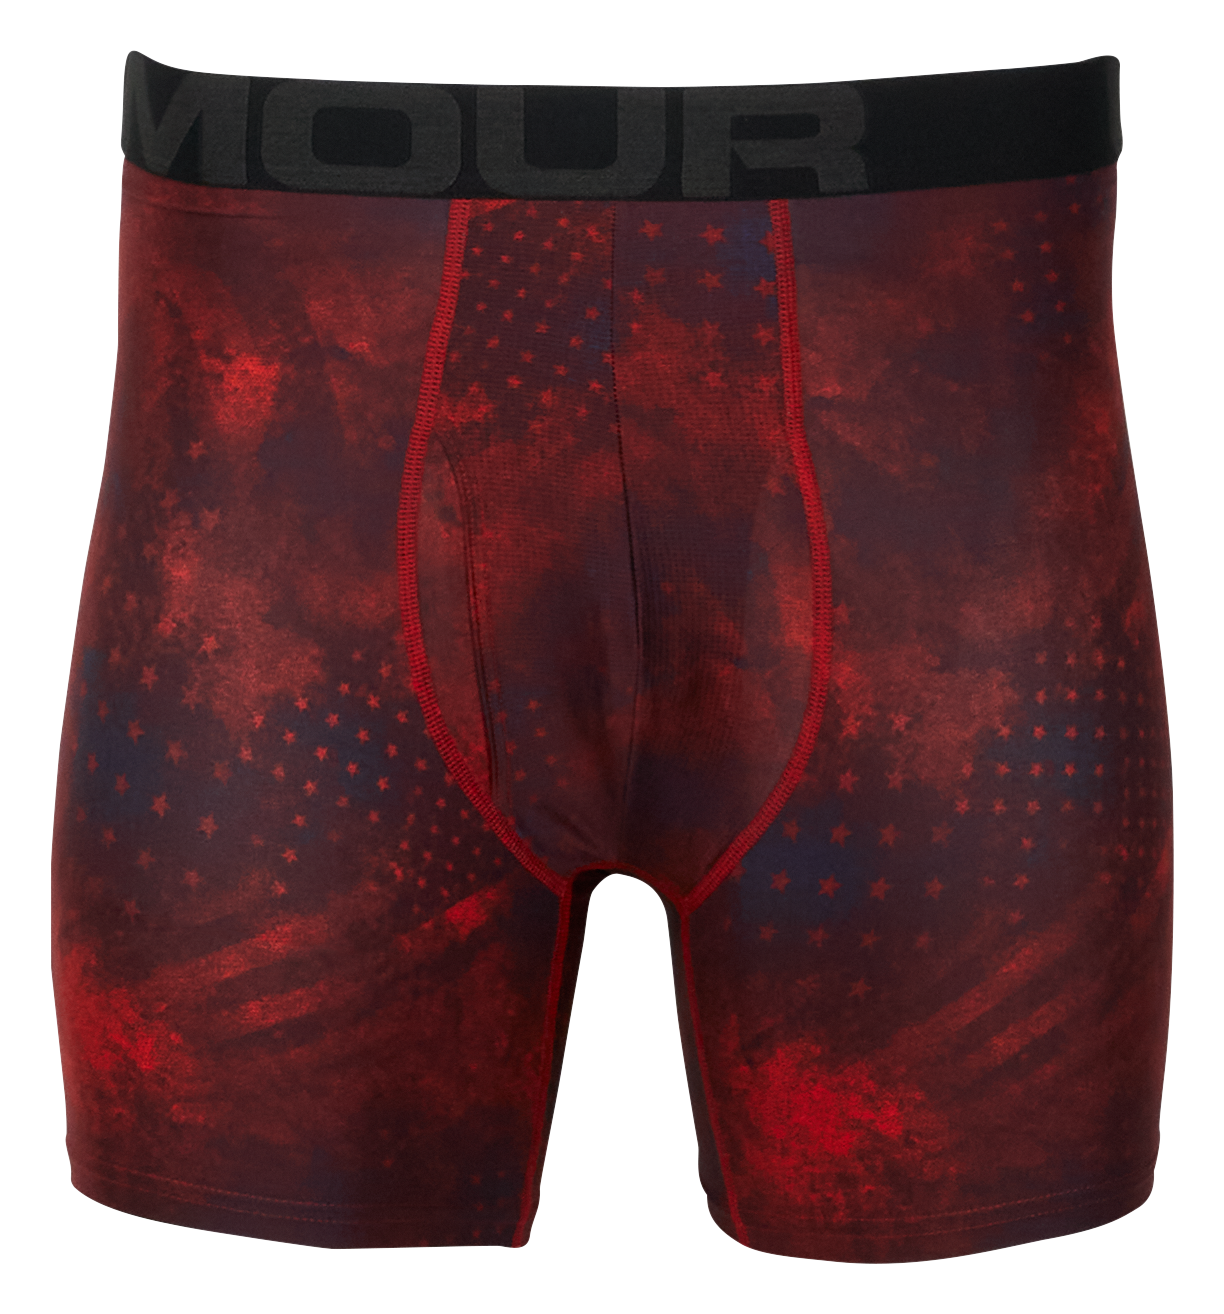 Under Armour Tech 6"" Patterned Boxerjock Shorts for Men - Red/Jet Gray - 3XL